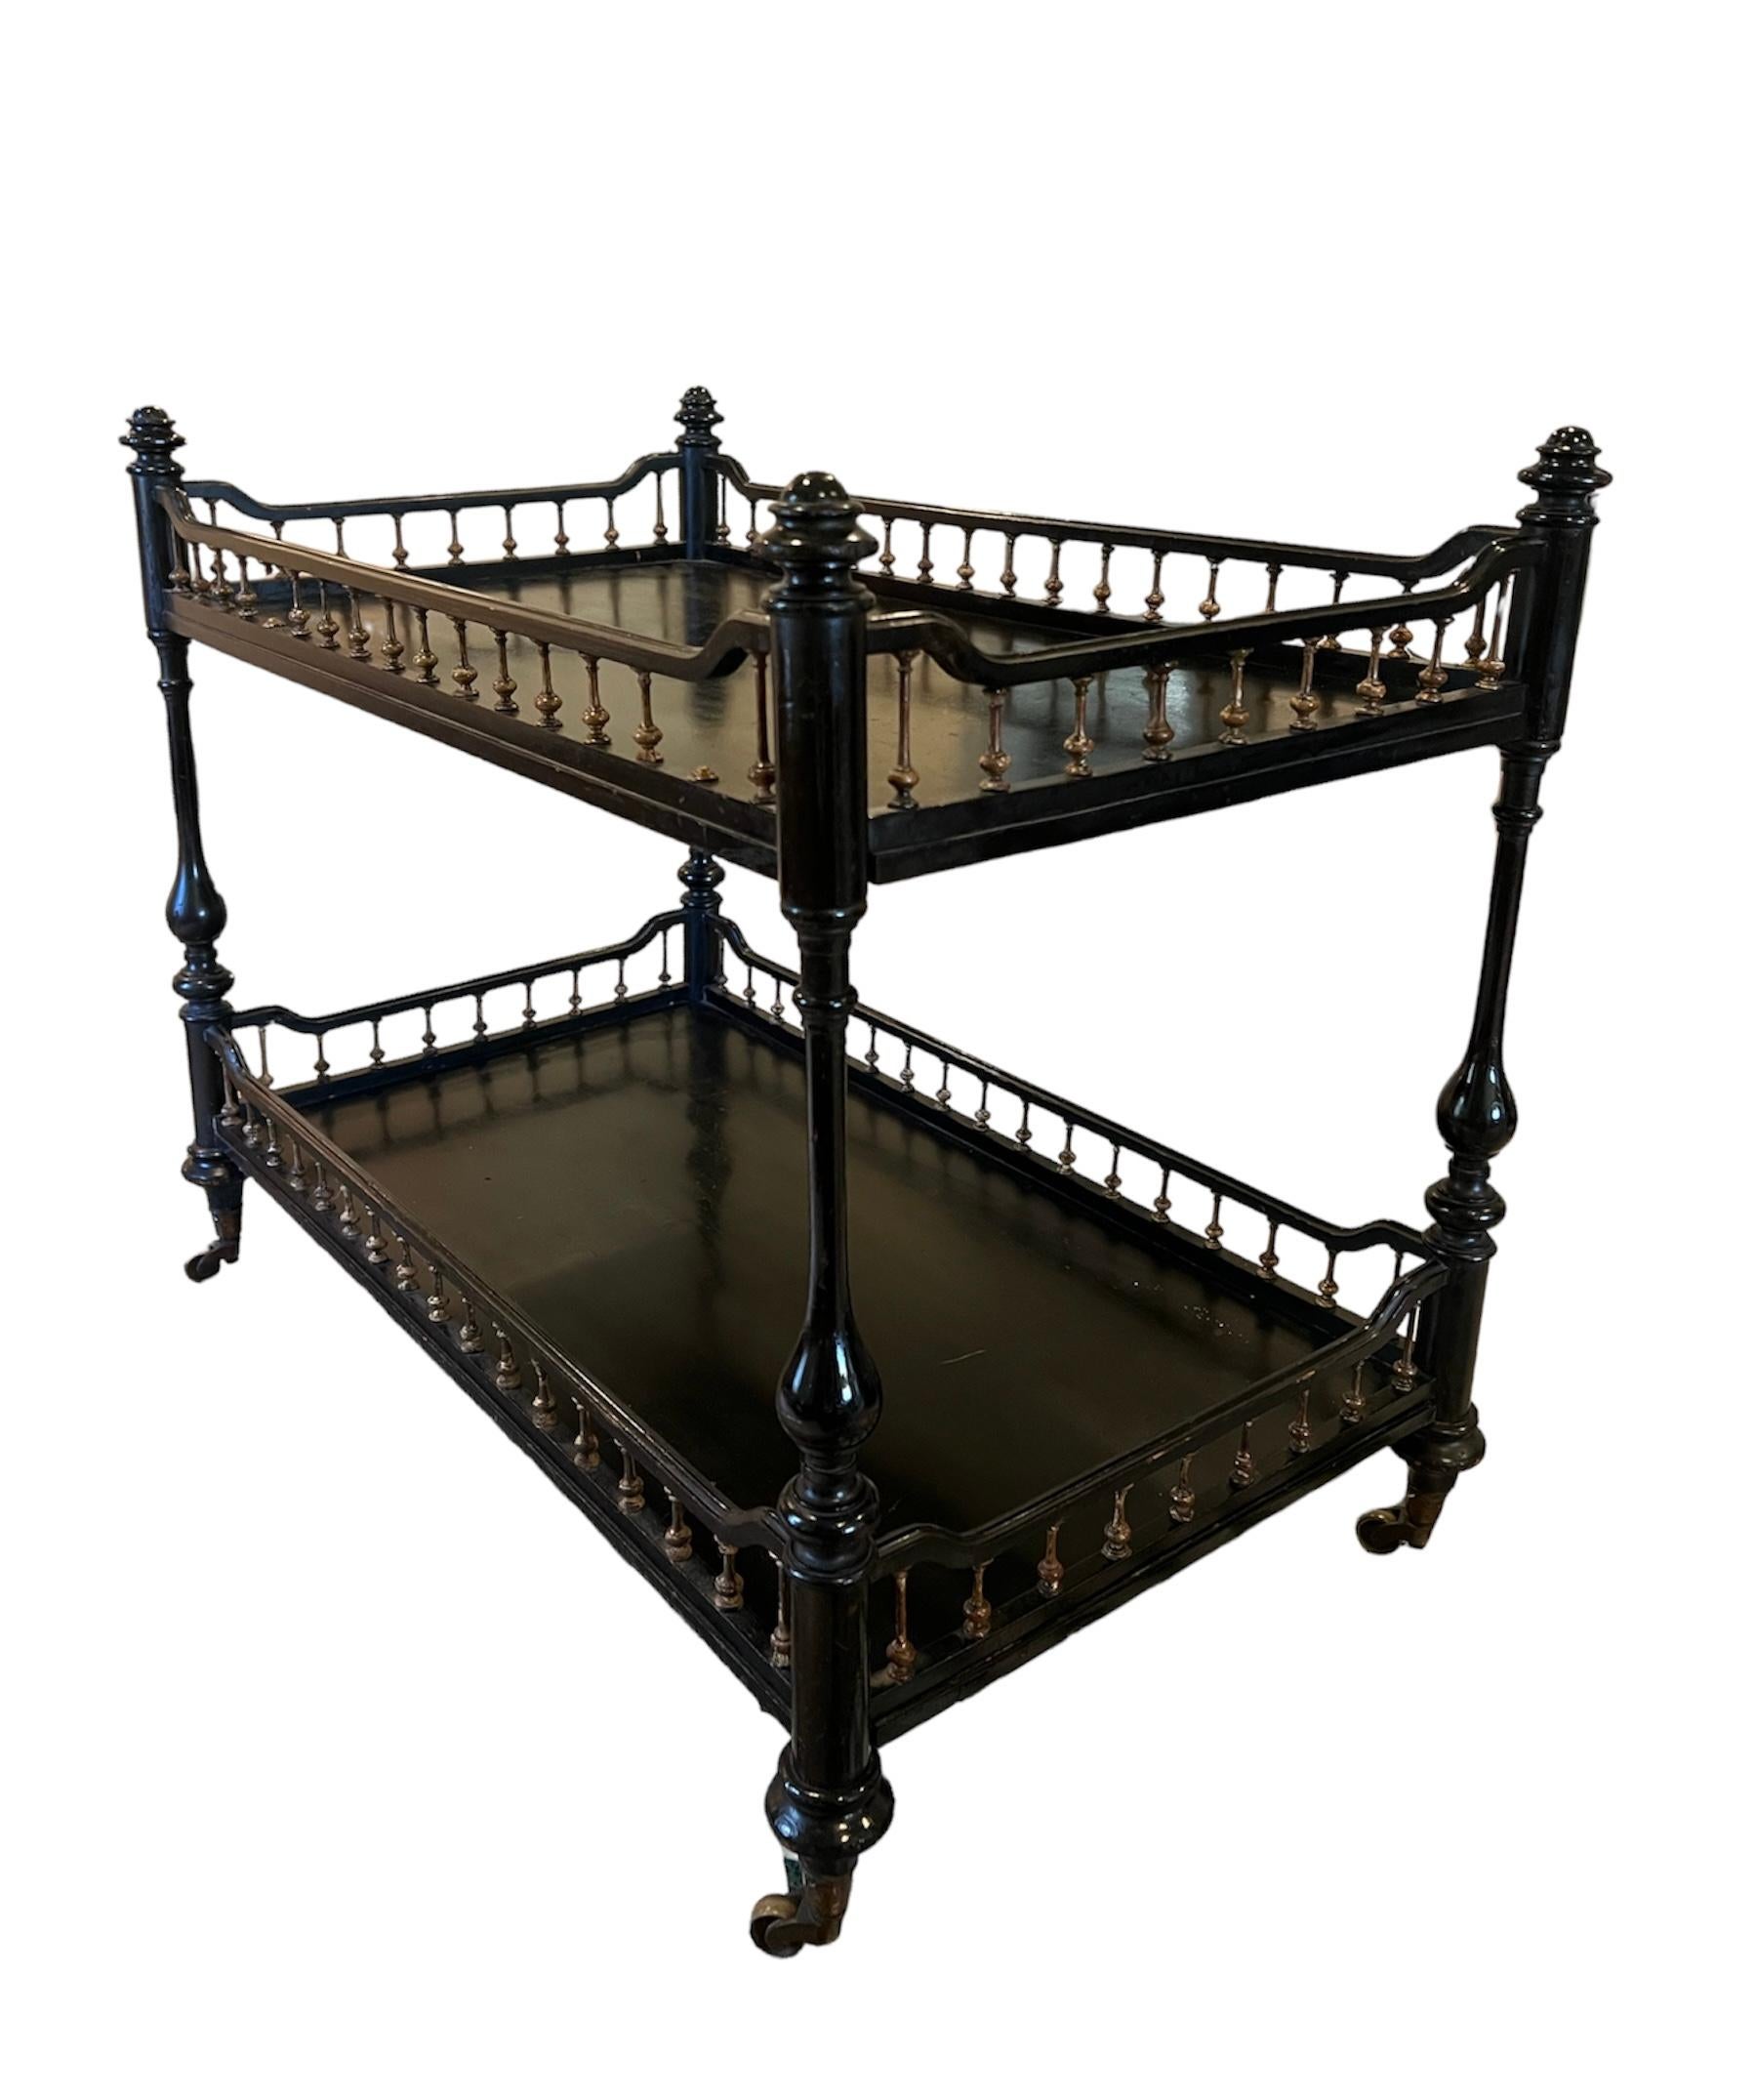 An exquisite two-tier étagère that exudes elegance and sophistication, perfect for connoisseurs of Victorian-era furniture with a touch of modern mobility. This stunning piece boasts an ebonized finish that gracefully contrasts with the delicate